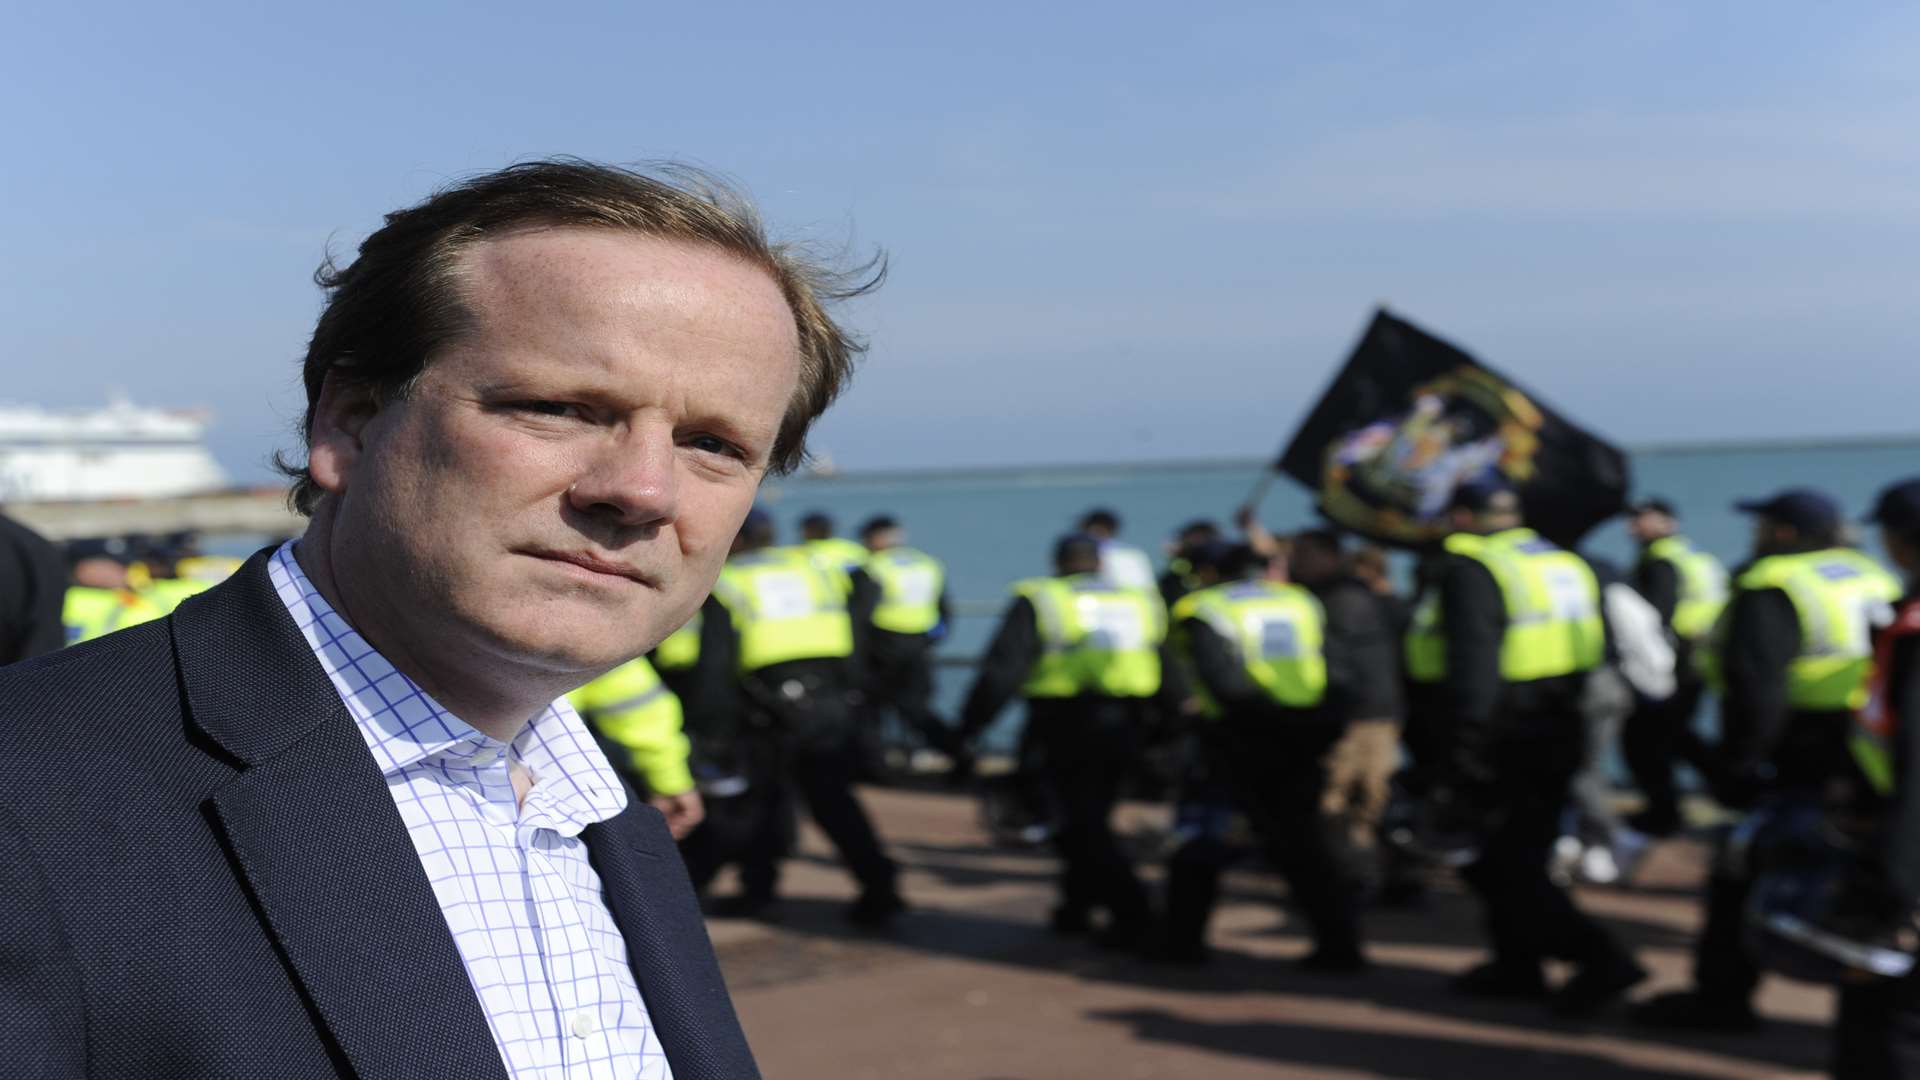 MP Charlie Elphicke at today's demonstration in Dover